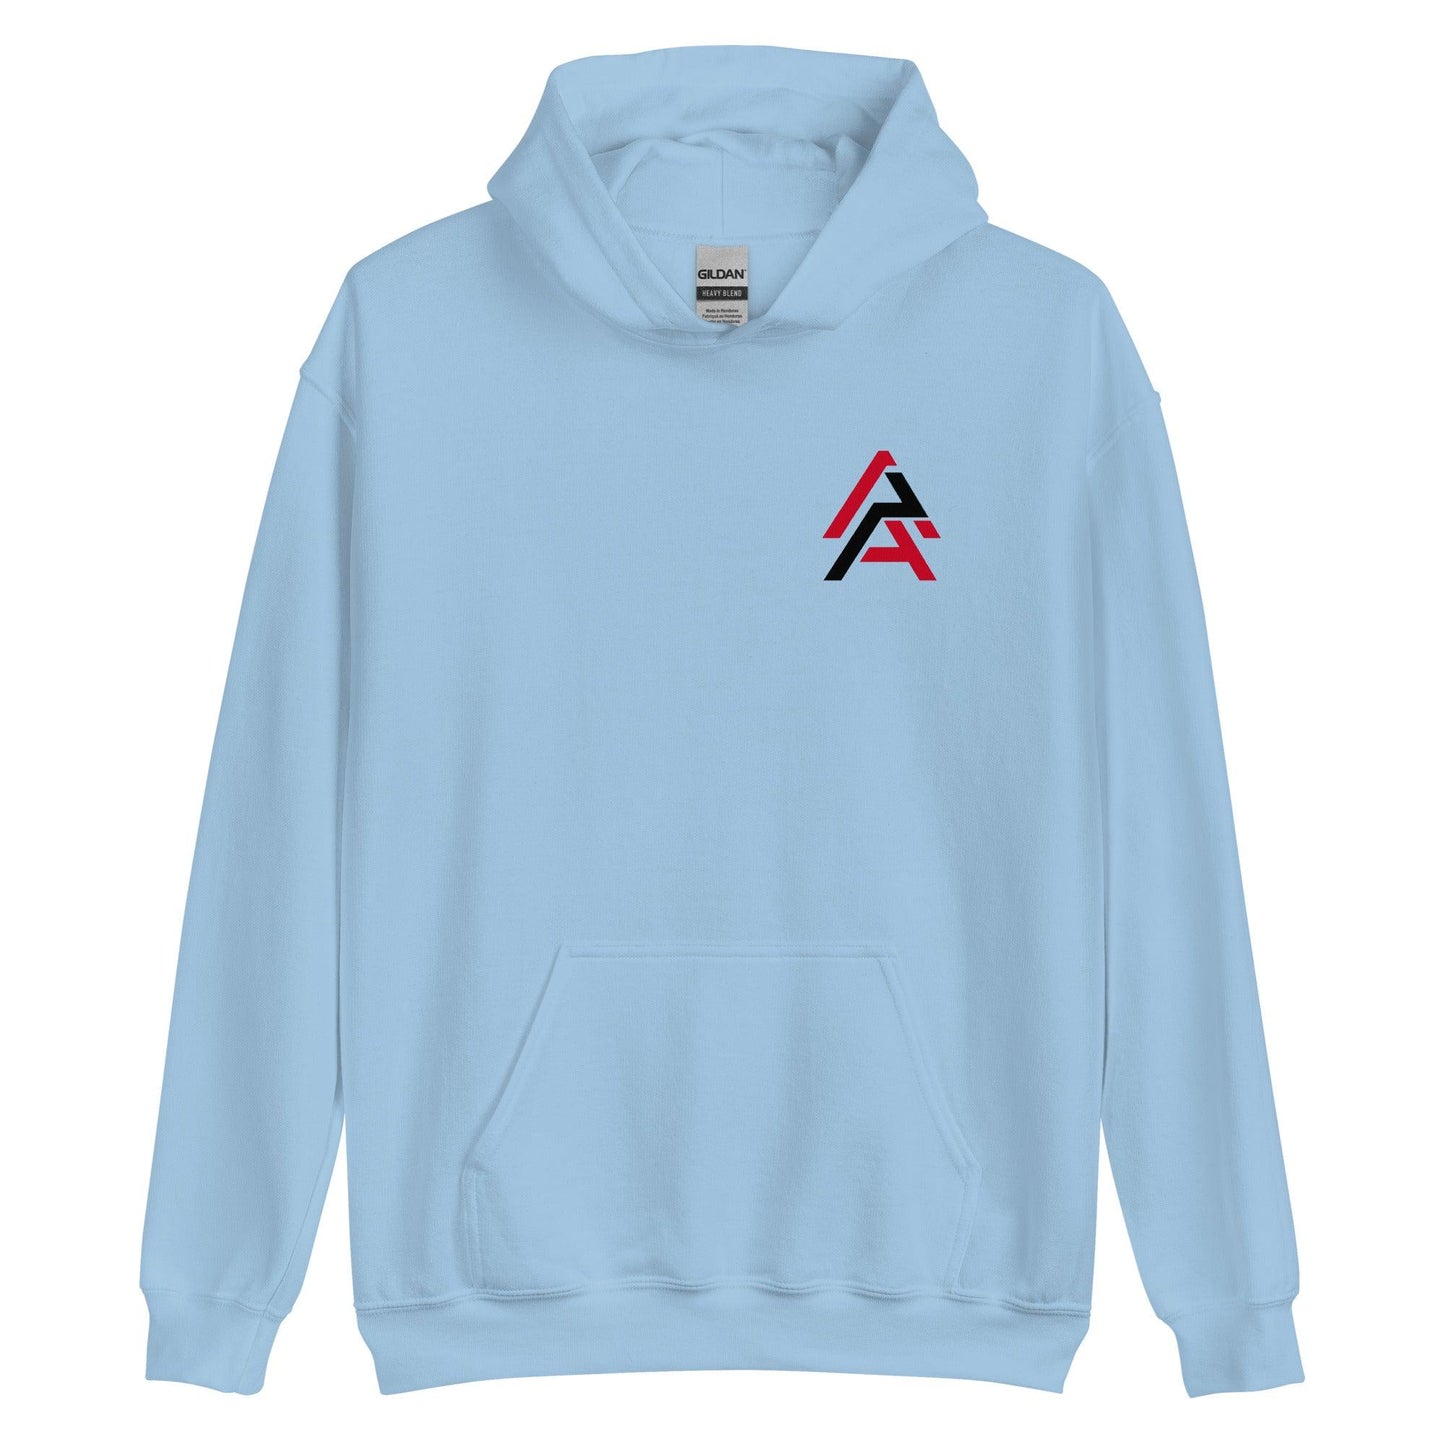 Anthony Alford “AA” Hoodie - Fan Arch